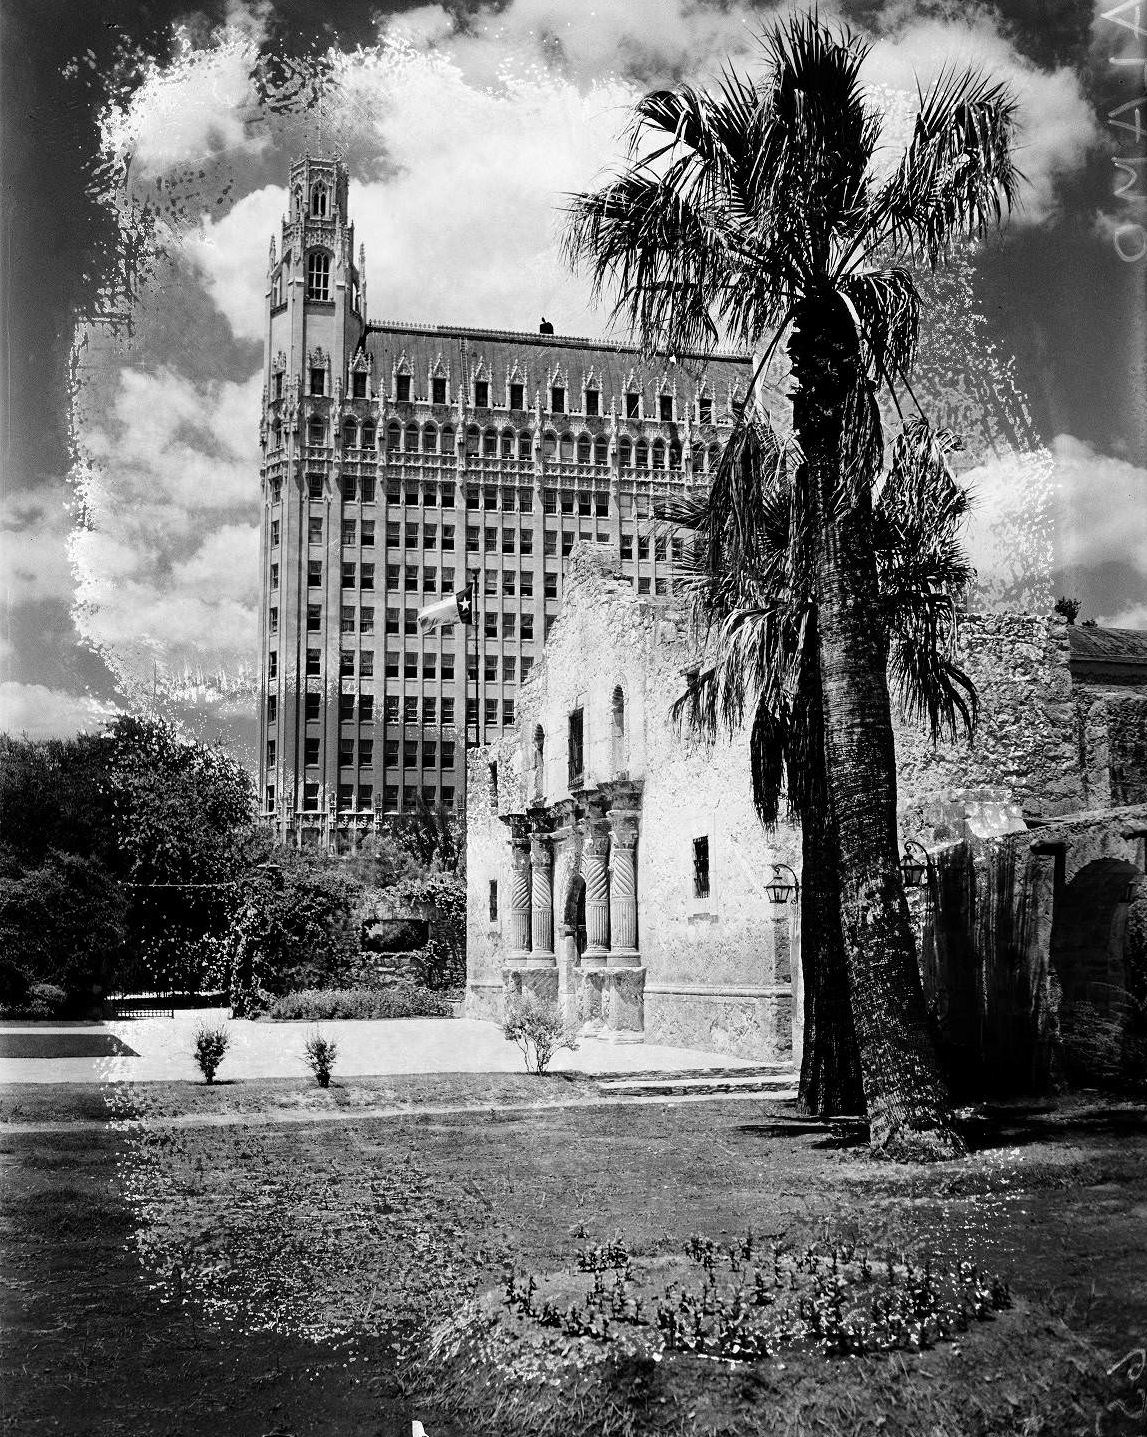 The front of the Alamo with the Emily Morgan Hotel, 1925